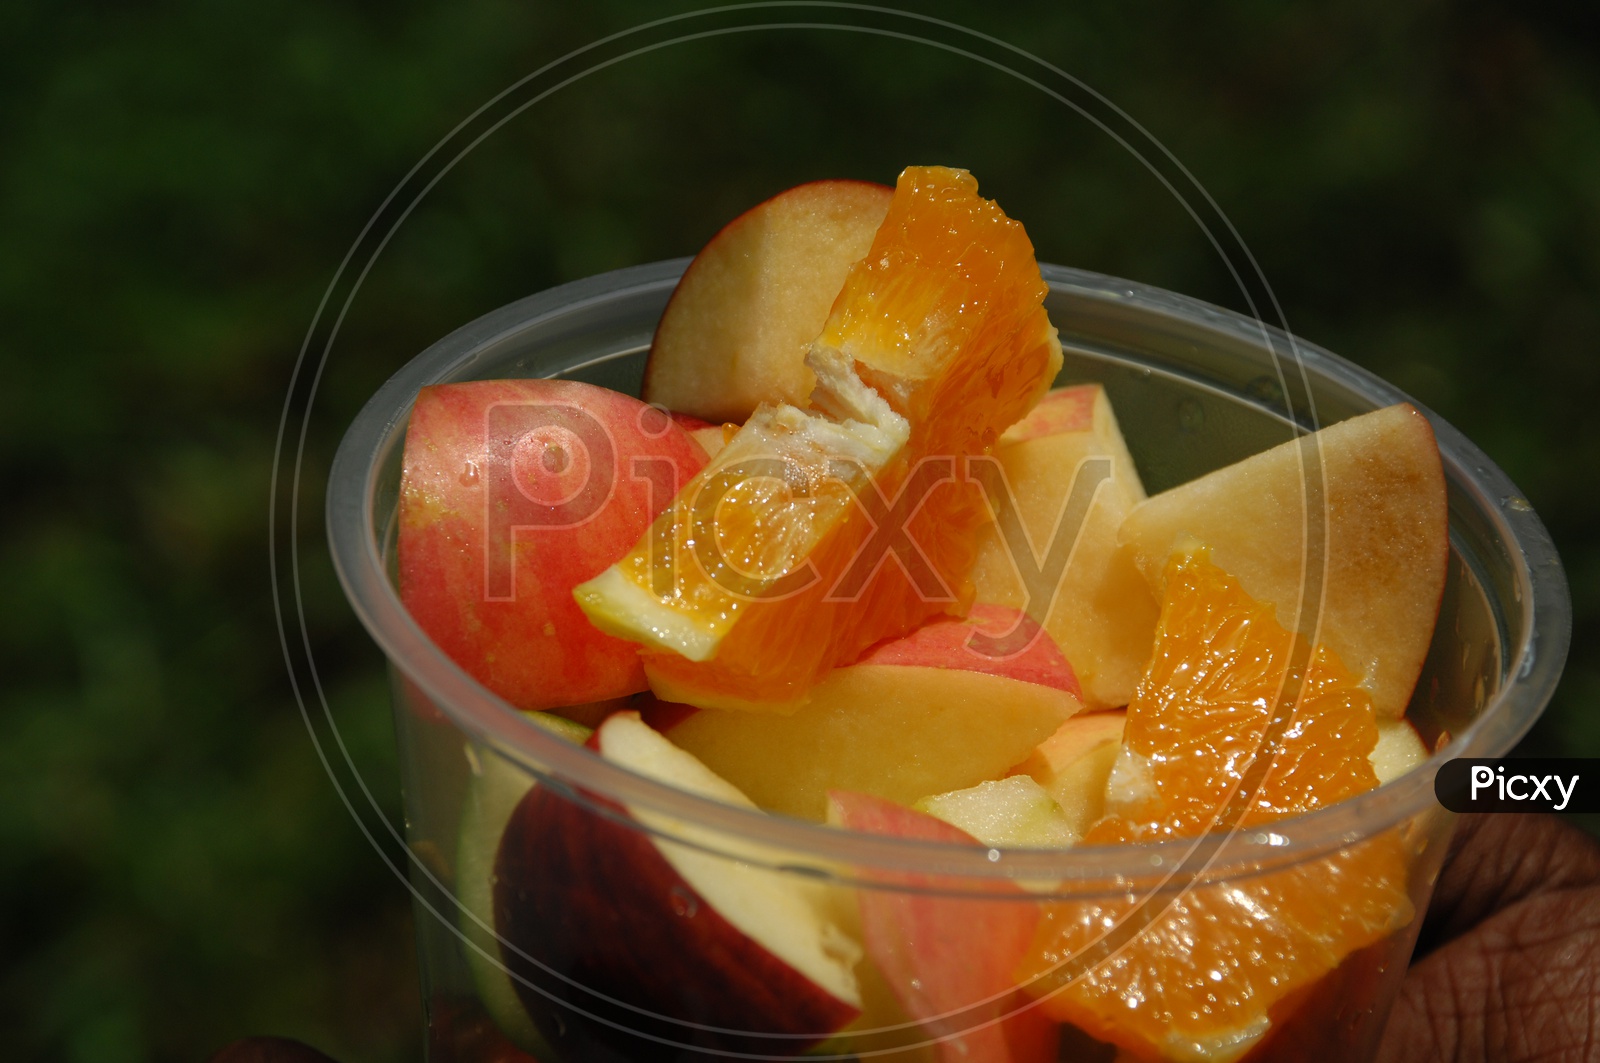 Apple and Orange pieces in a plastic cup